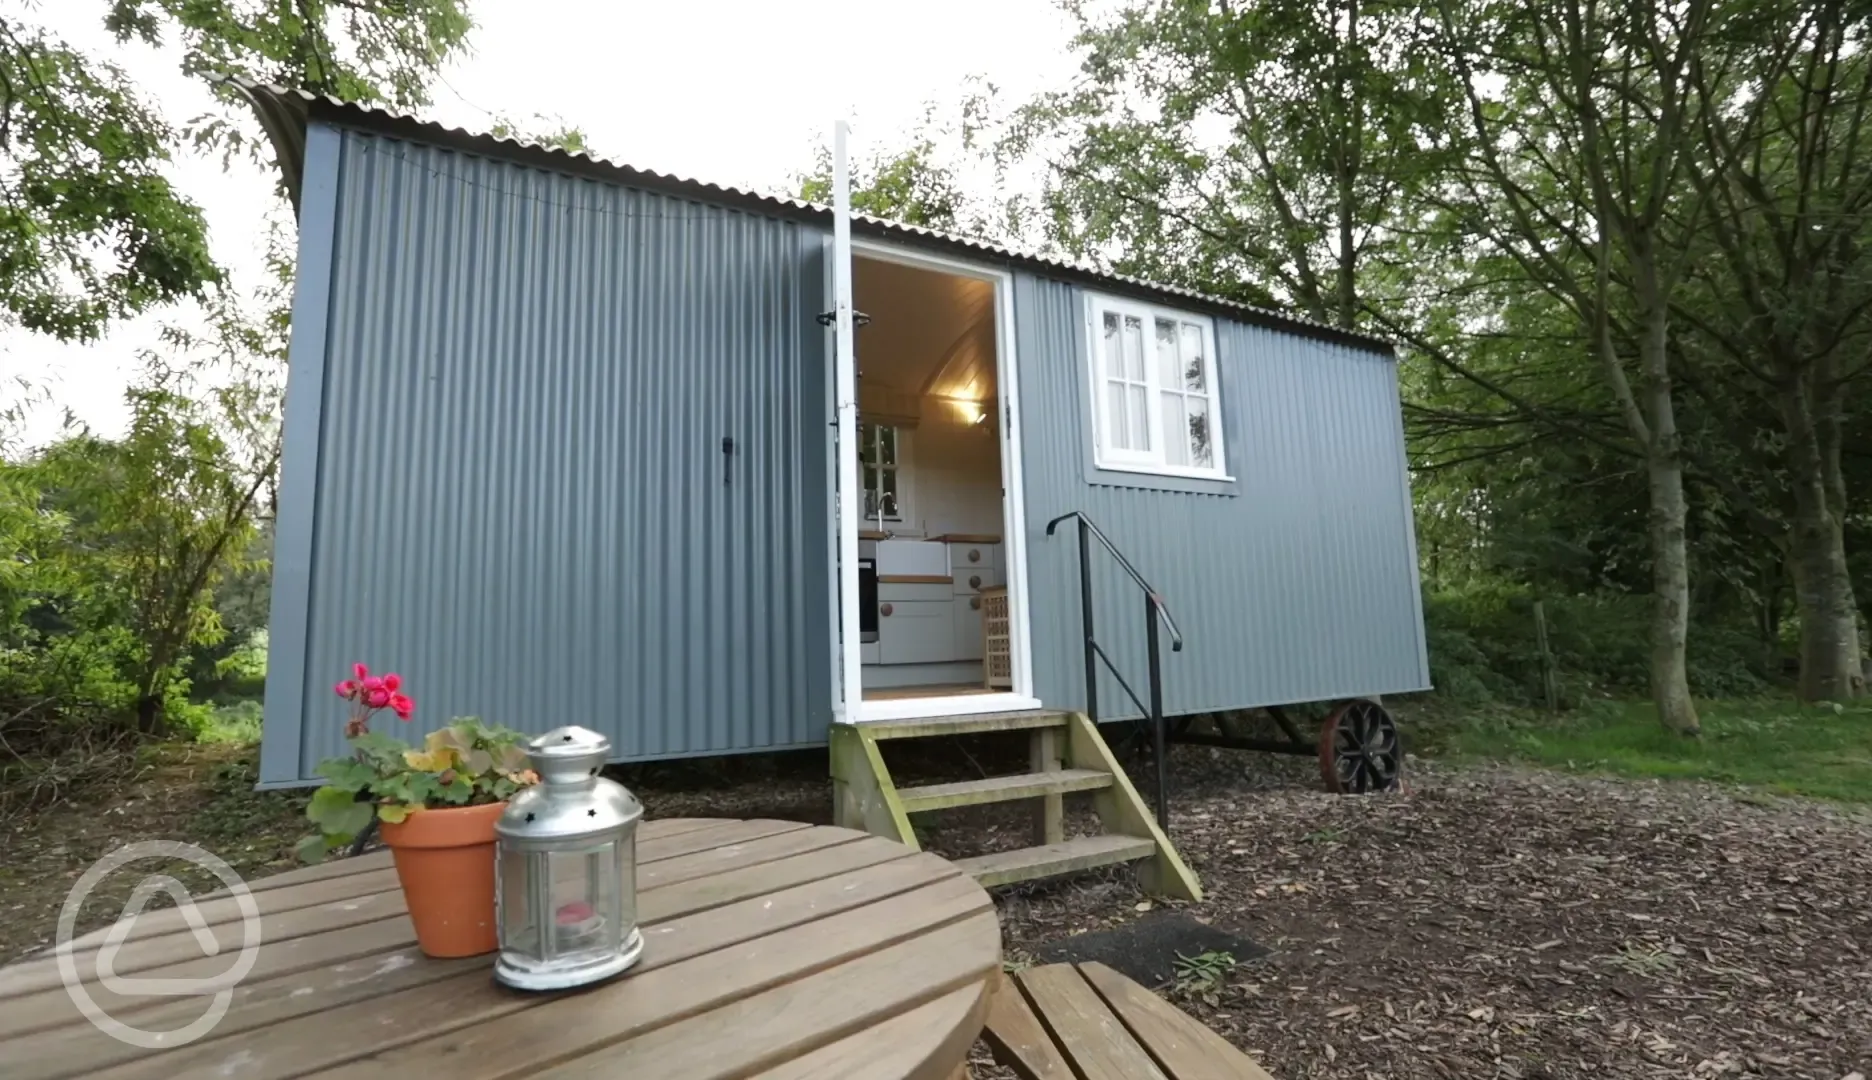 'Mayfly' one of our all-in-one shepherd's huts